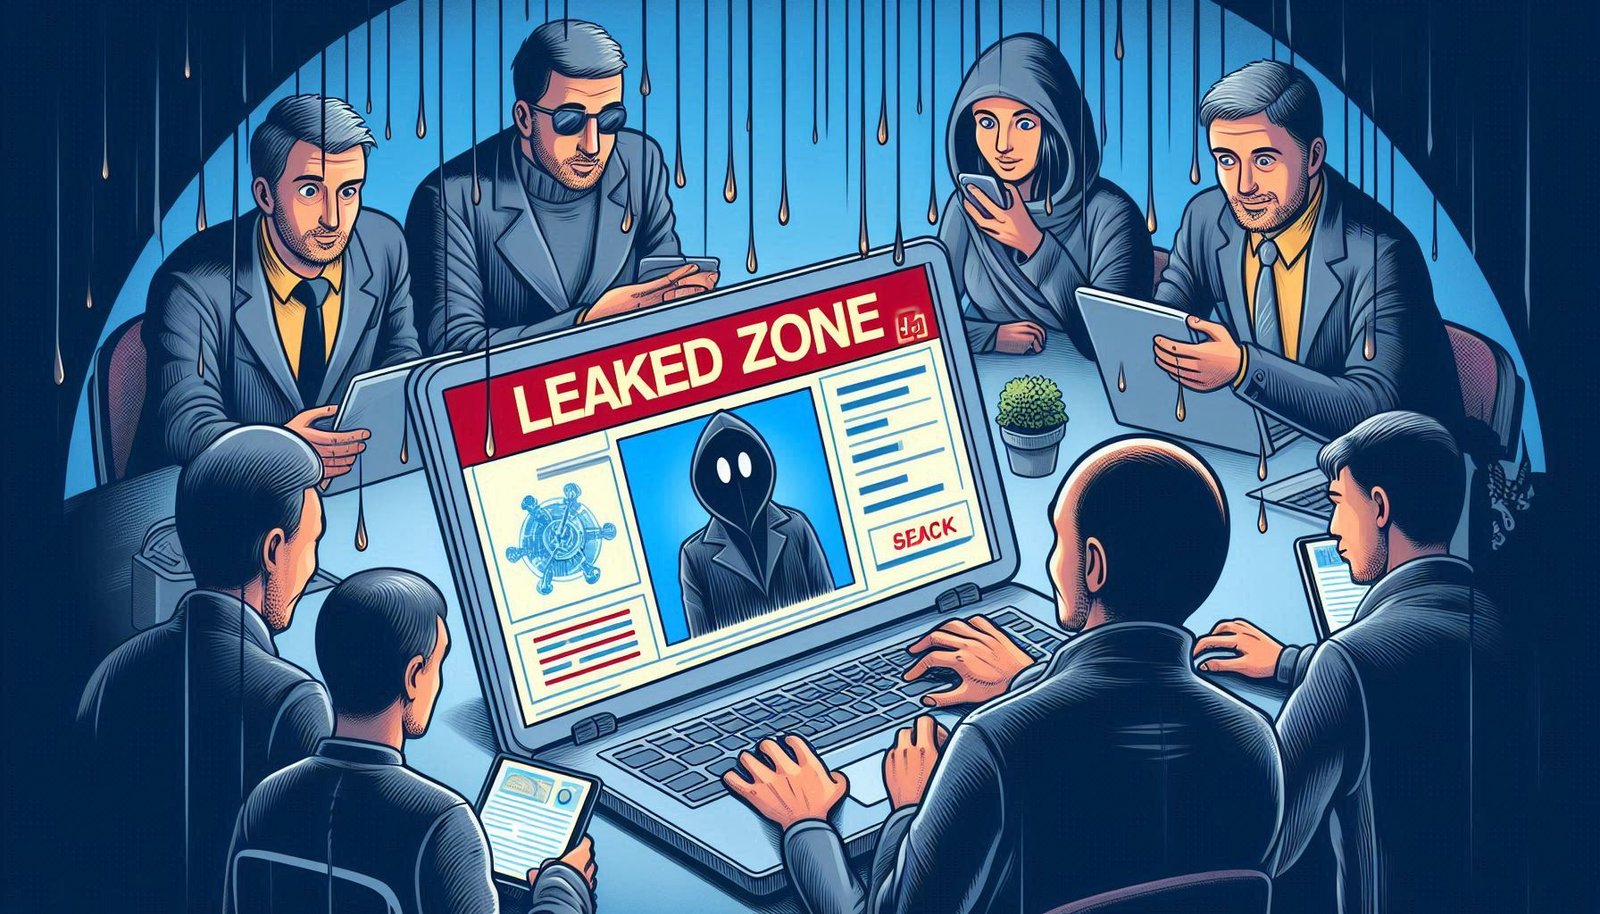 LeakedZone: A Look at the Controversial Website